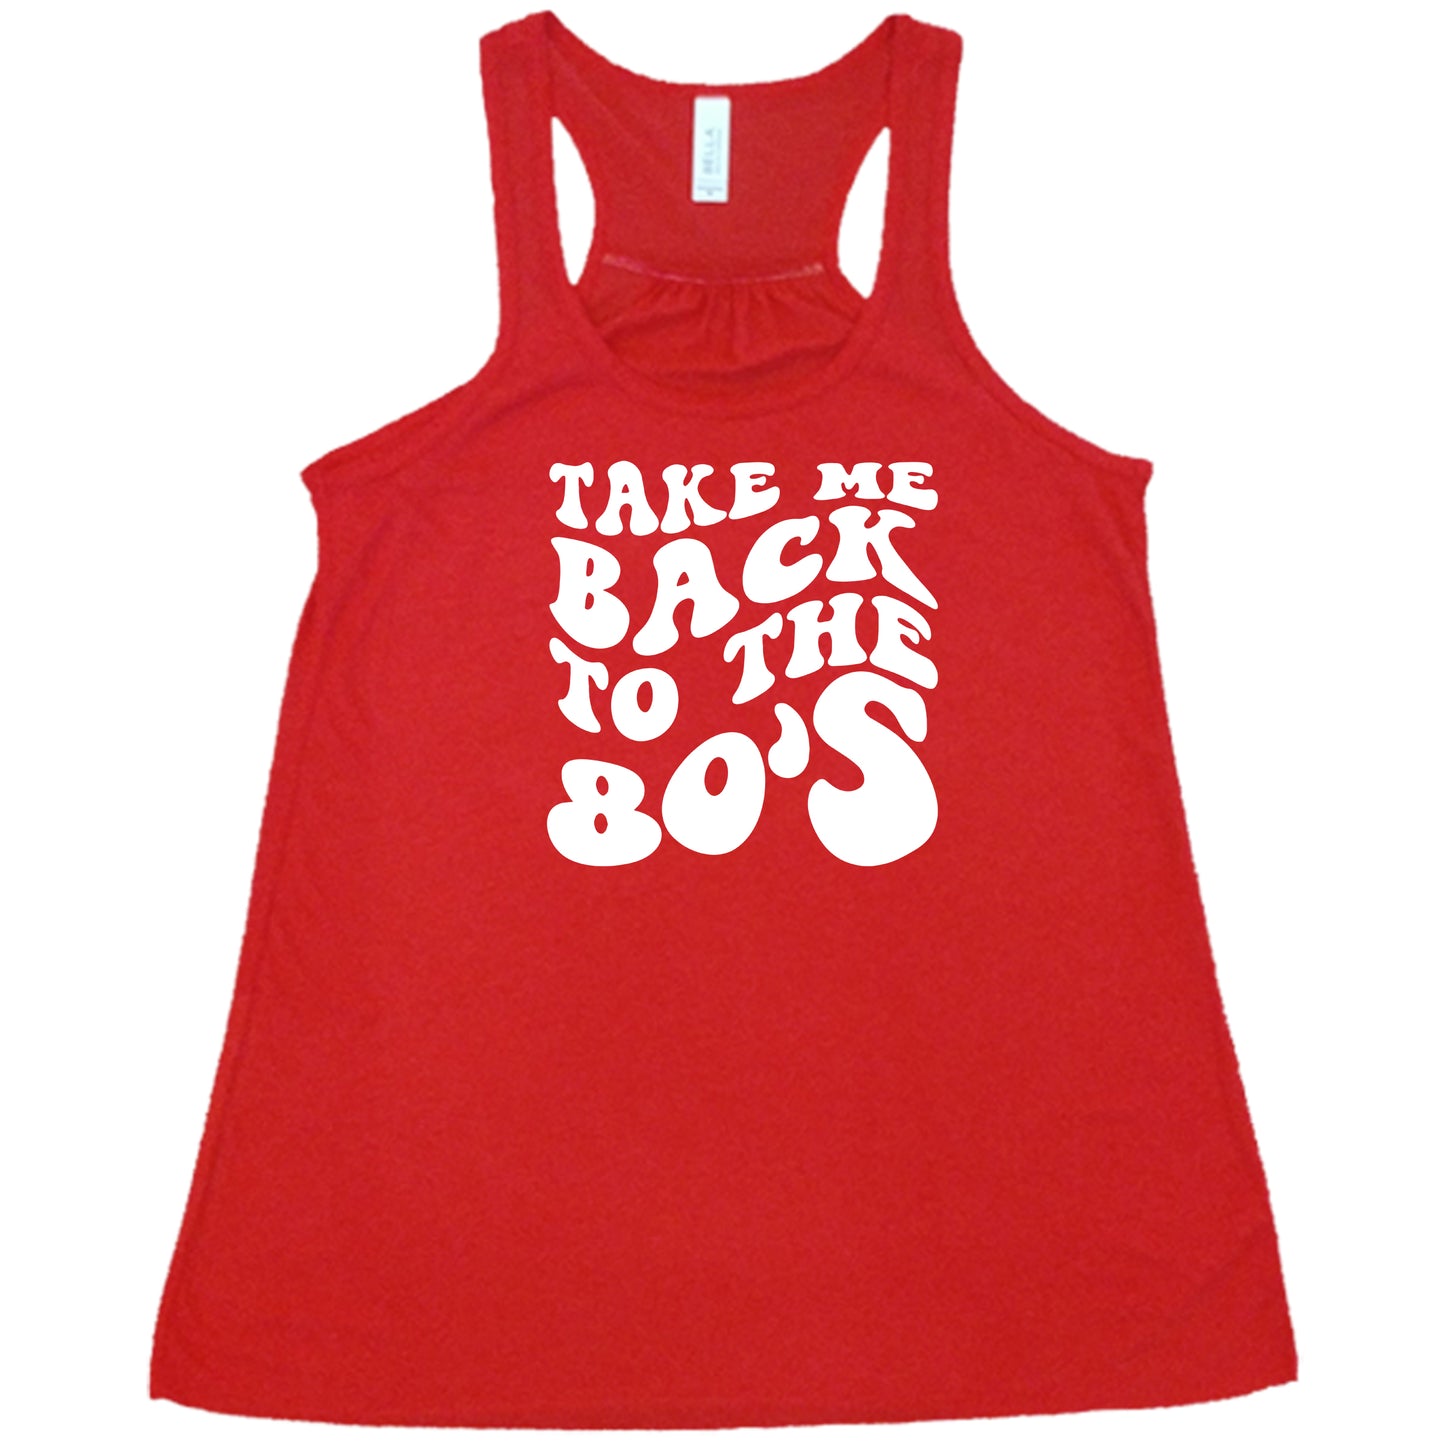 take me back to the 80's quote red racerback shirt